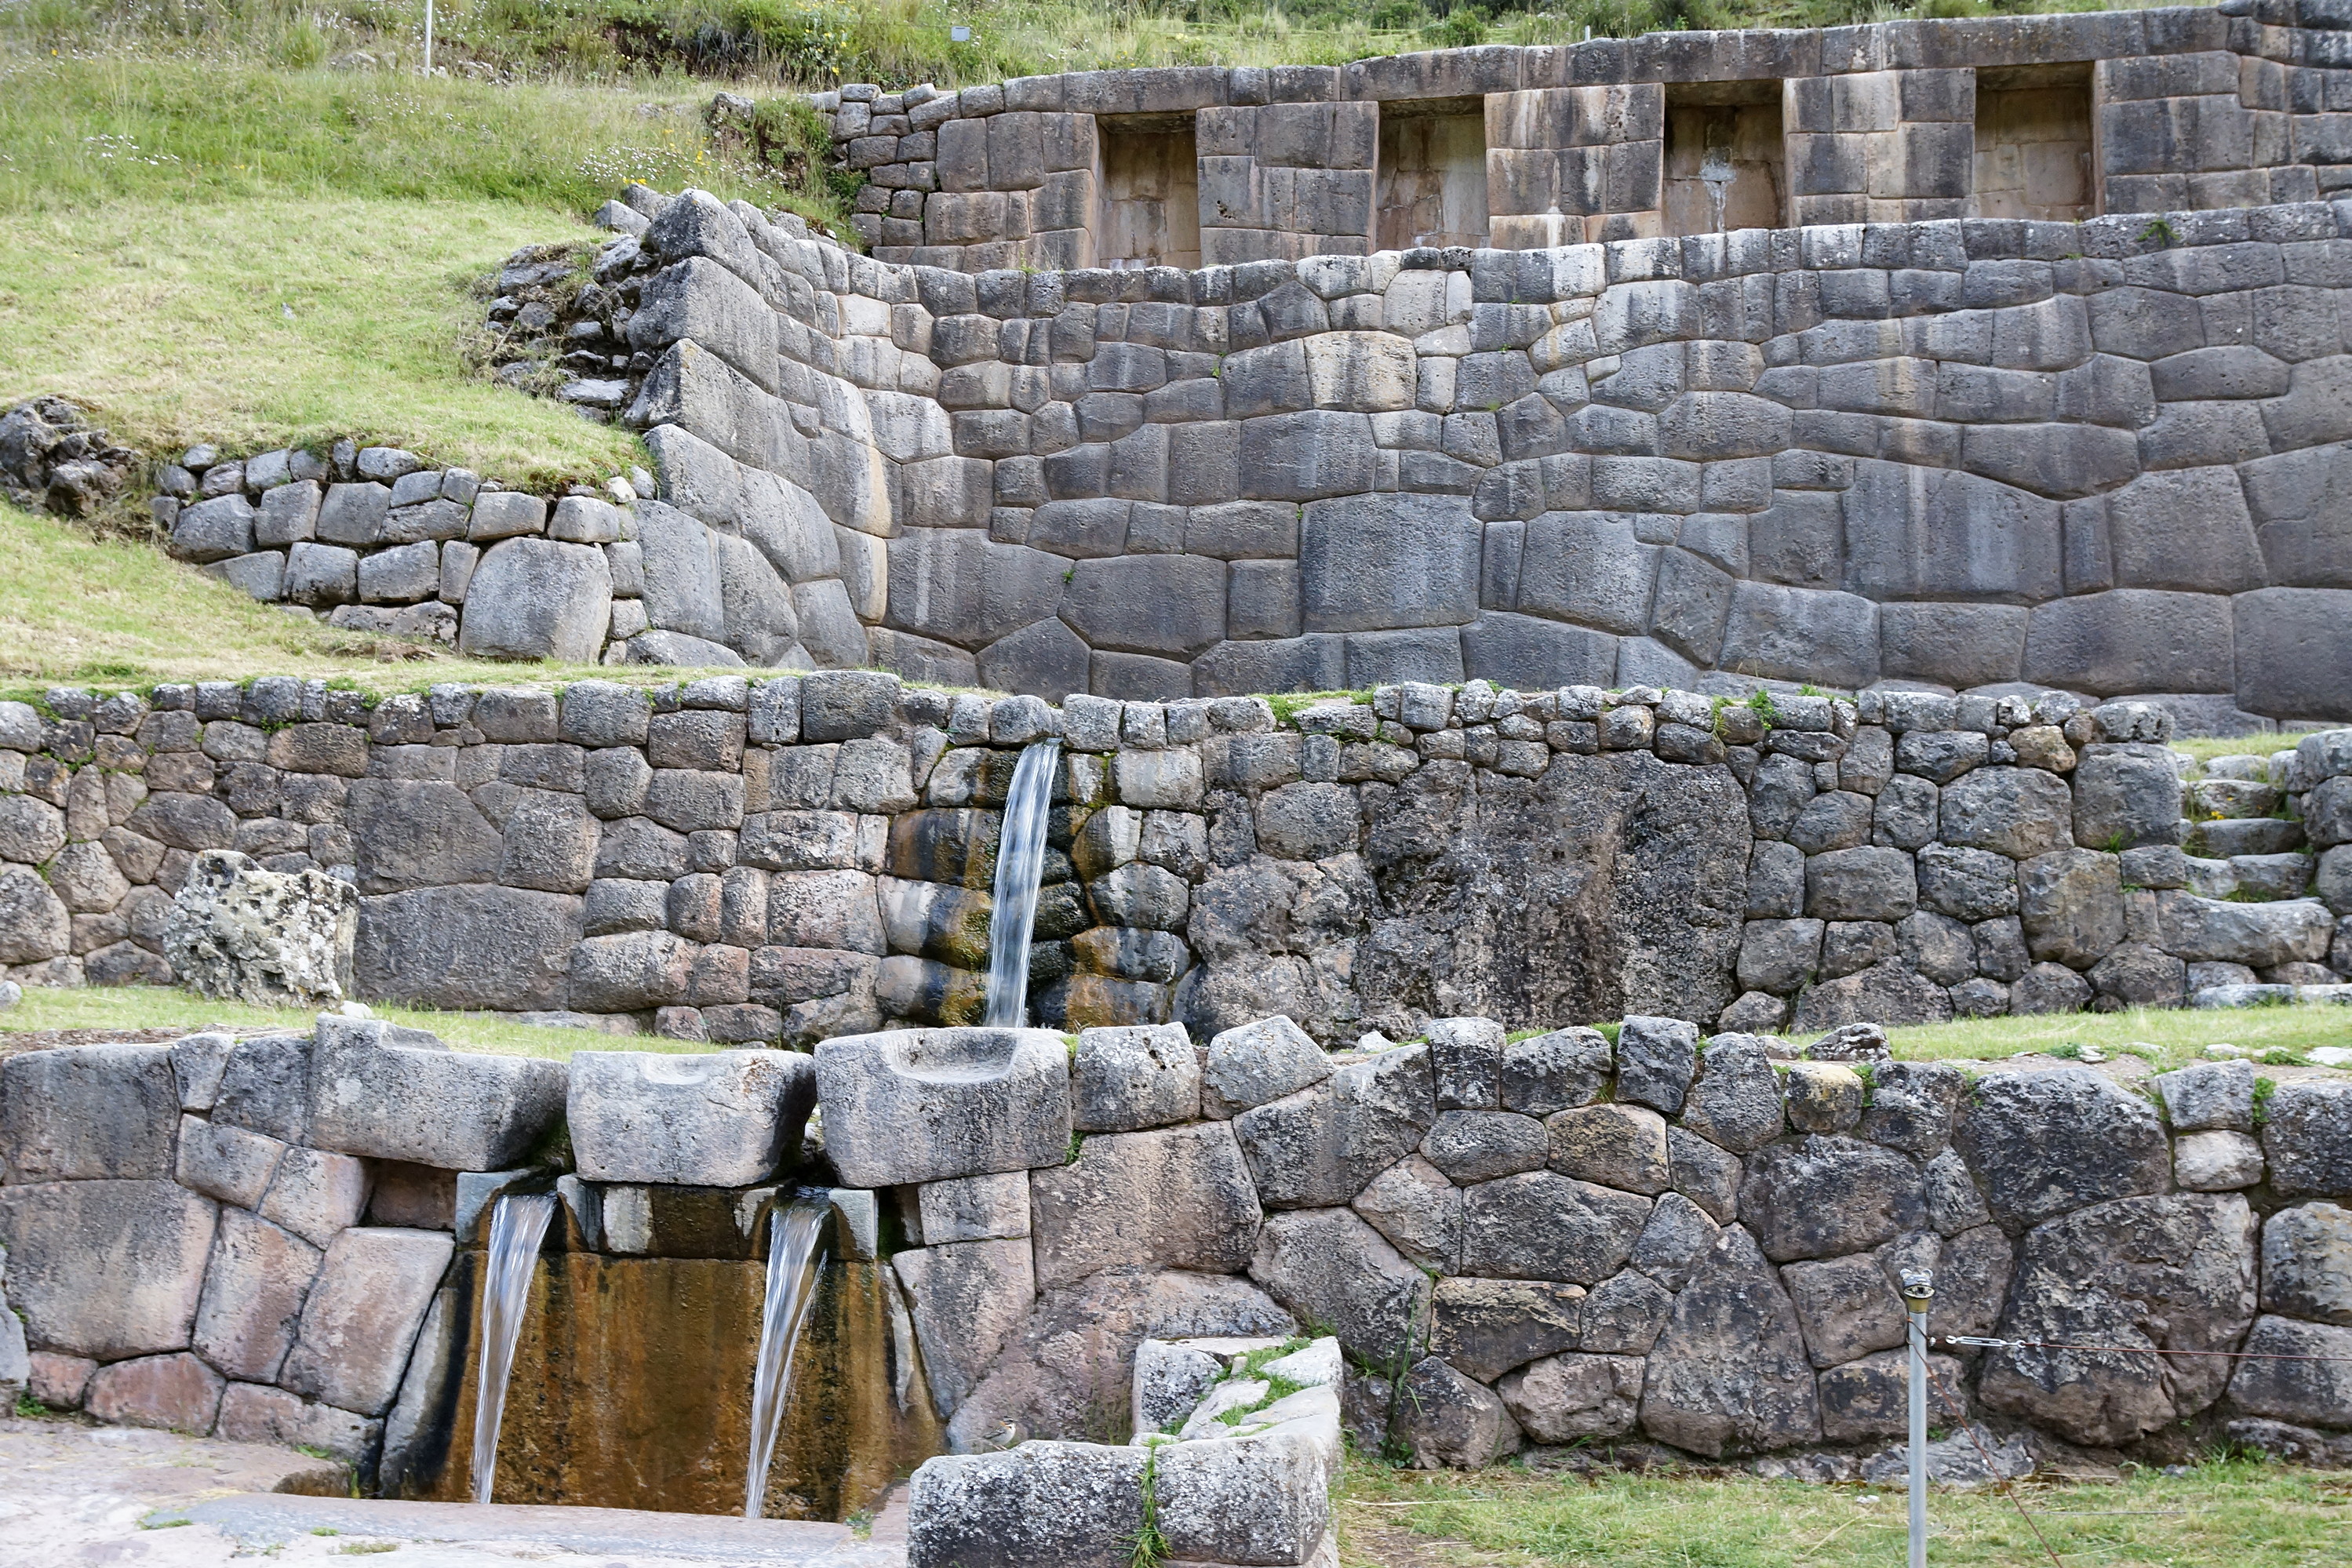 Ancient waterfall in Cuzco in Peru by Dragisa Braunovic